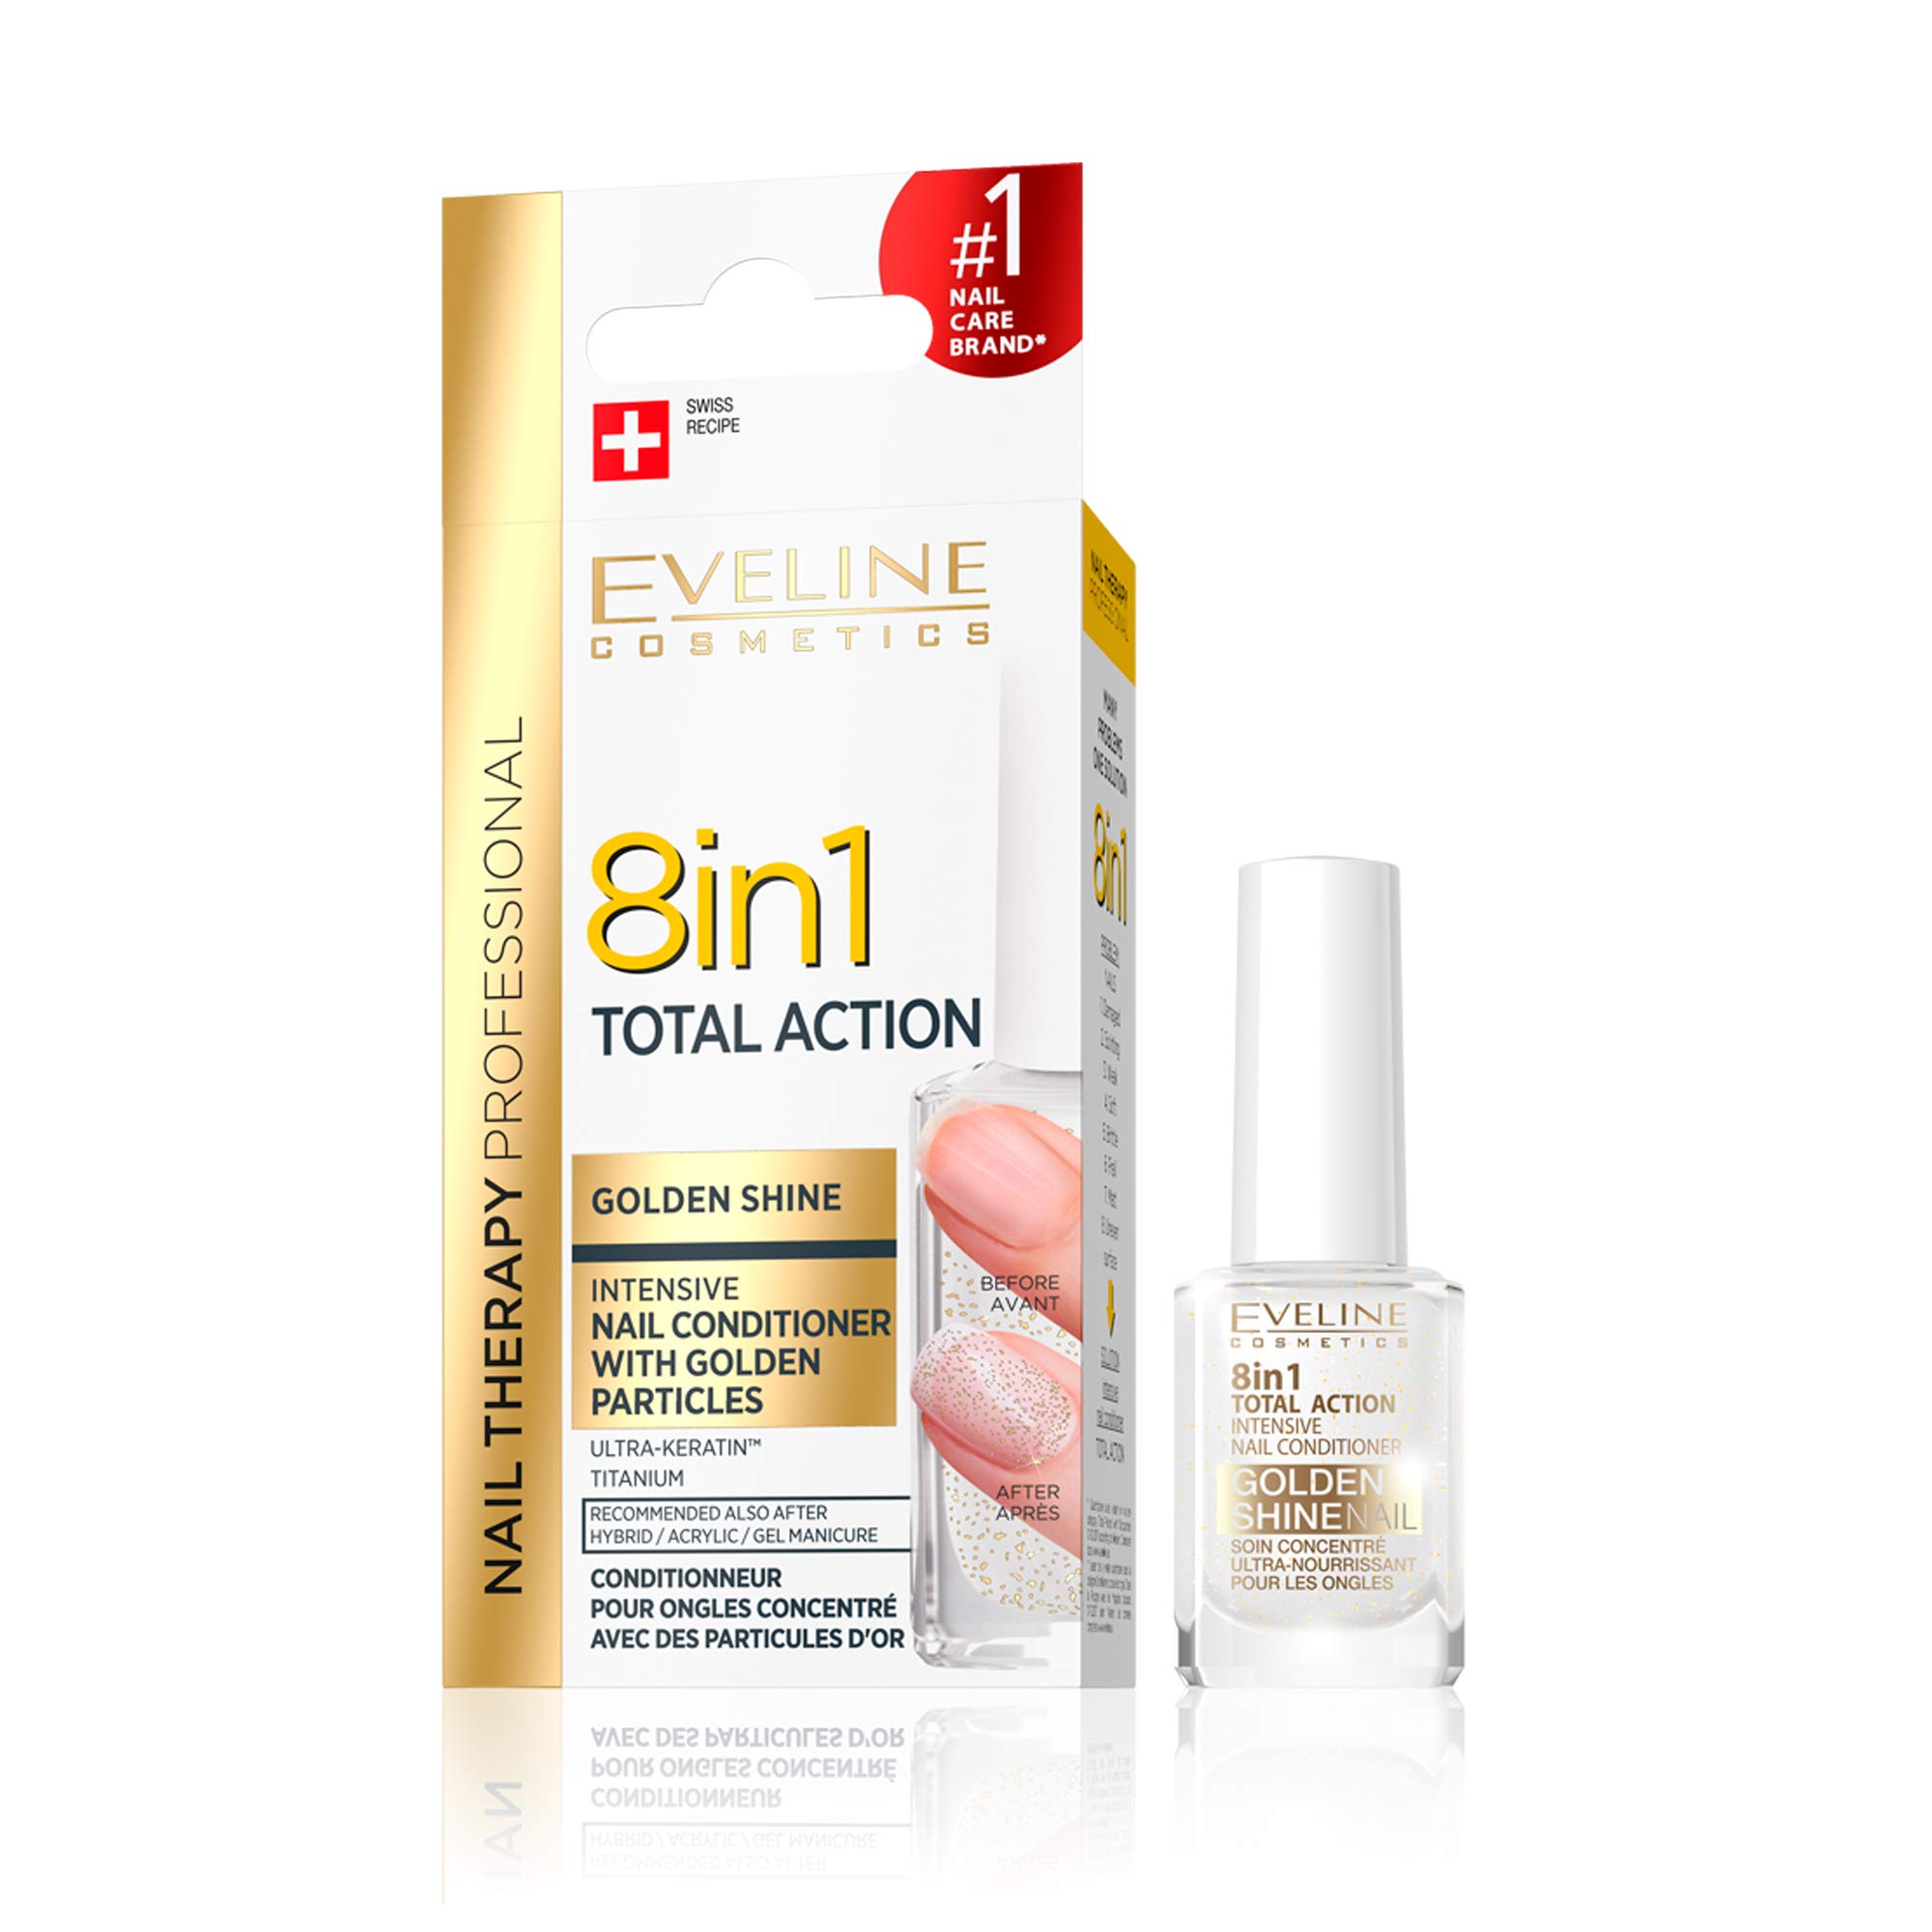 Intensive Nail Conditioner EVELINE 8 in 1 TOTAL ACTION Sensitive - NEW -  12ml | eBay